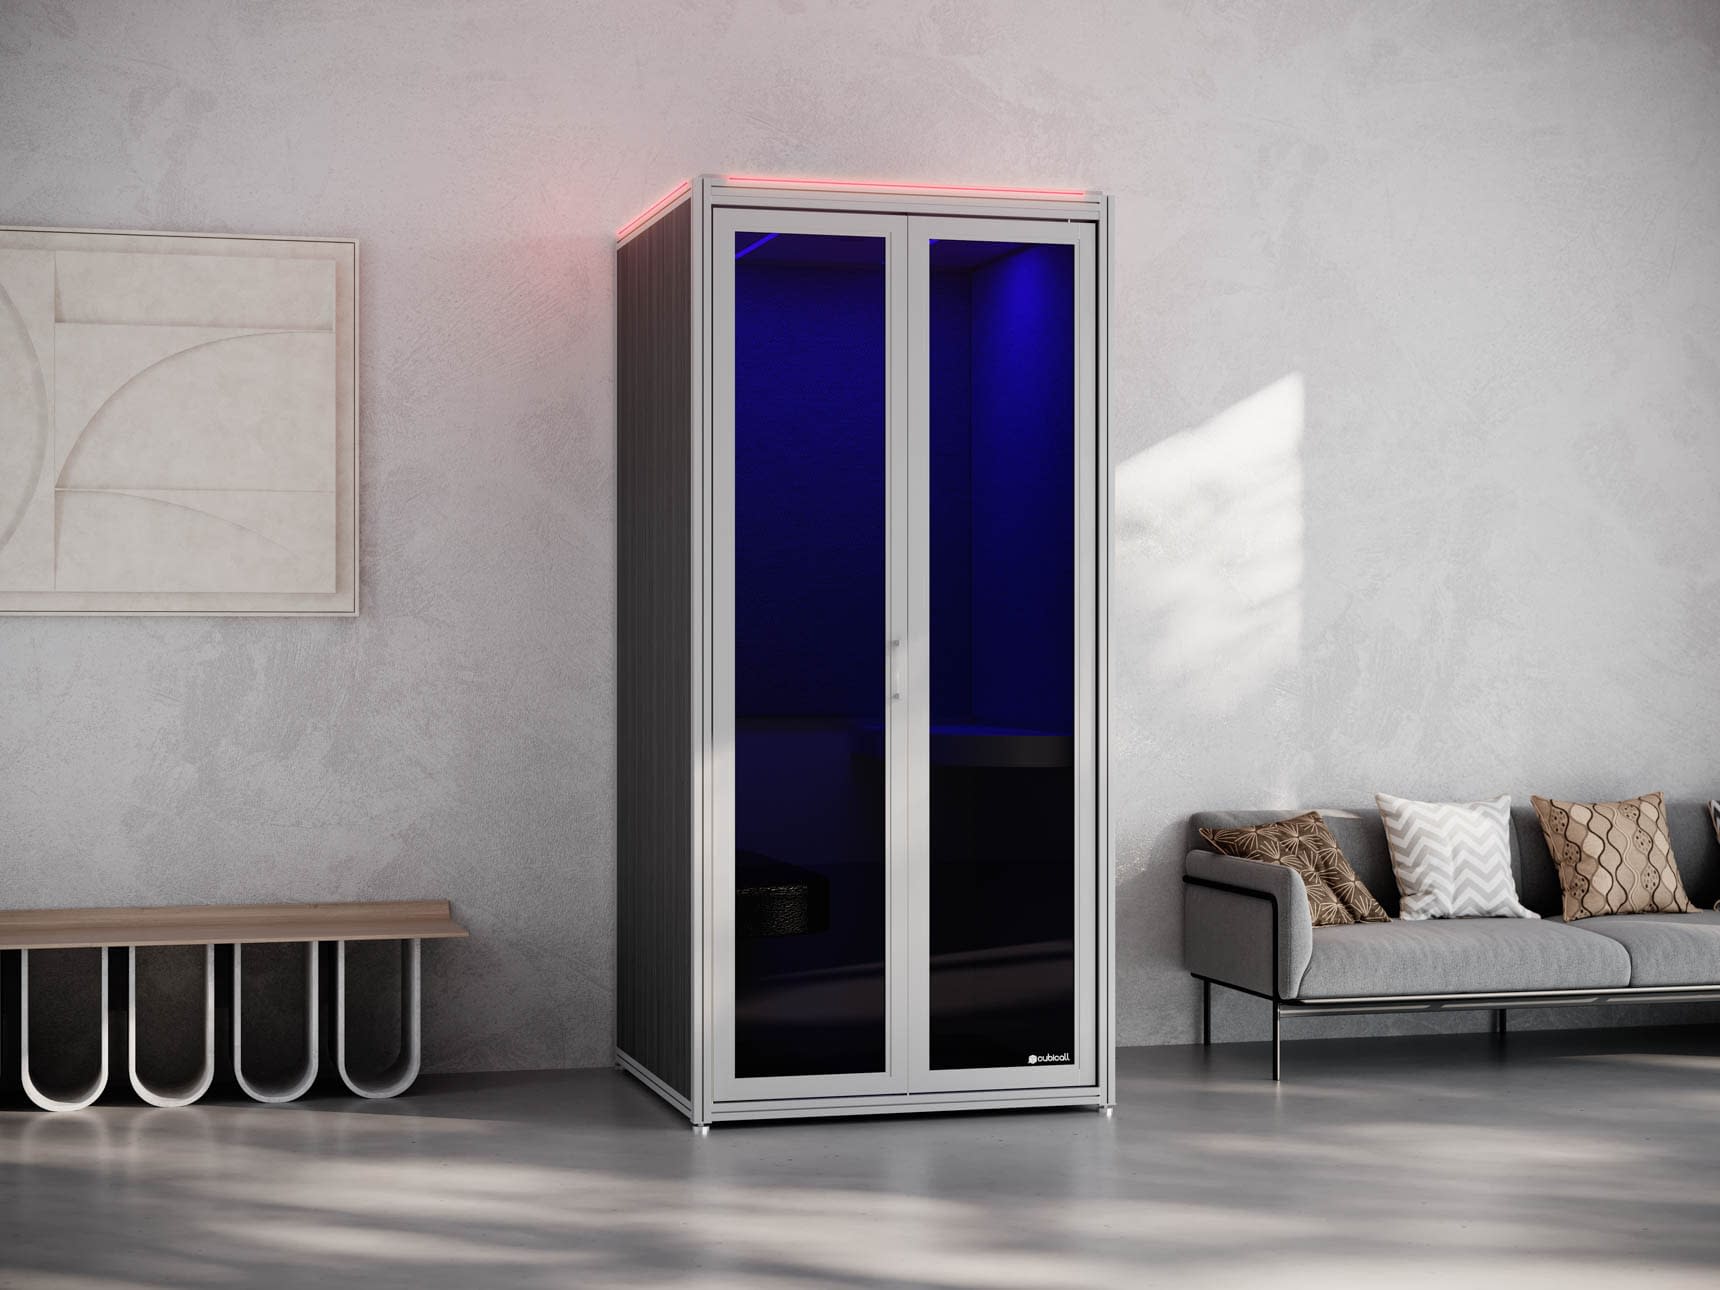 UV Phone Booth for After-use Disinfection